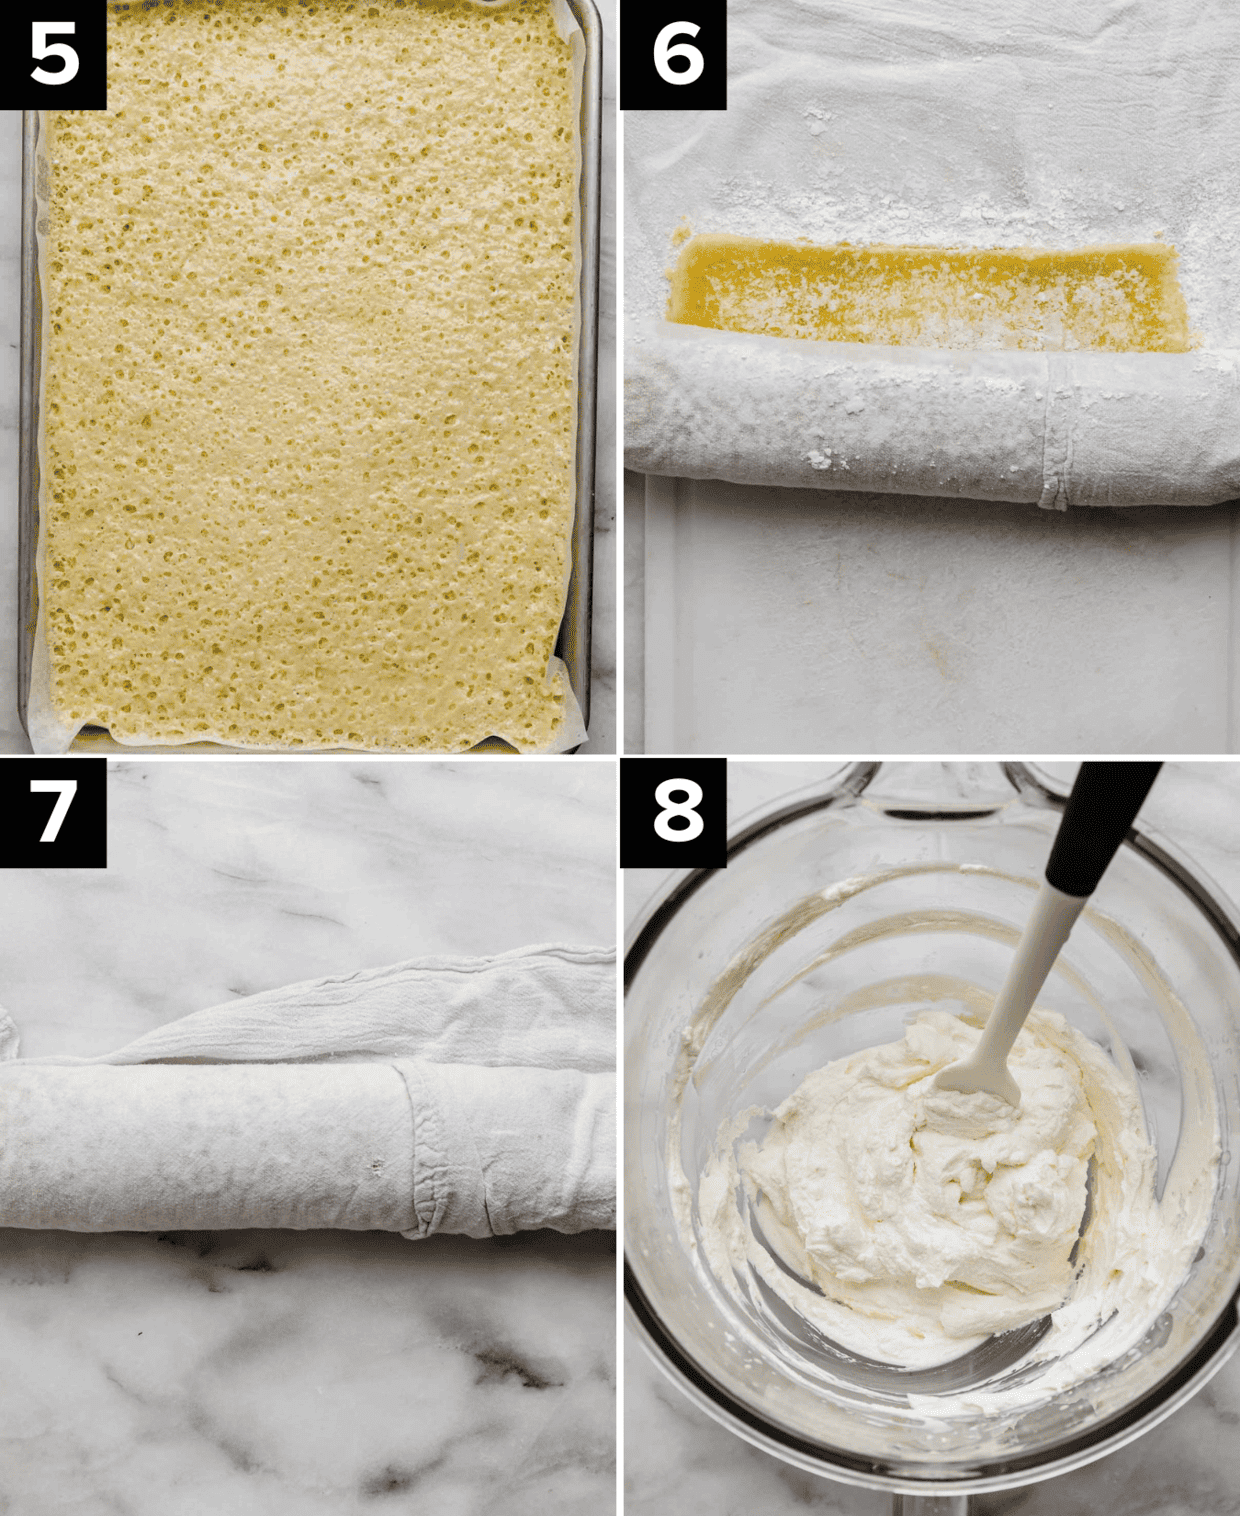 Top left image is baked lemon Swiss roll in baking sheet, top right image is lemon Swiss roll rolled in a white towel (same as bottom left image), bottom right image is mascarpone whipped cream. 